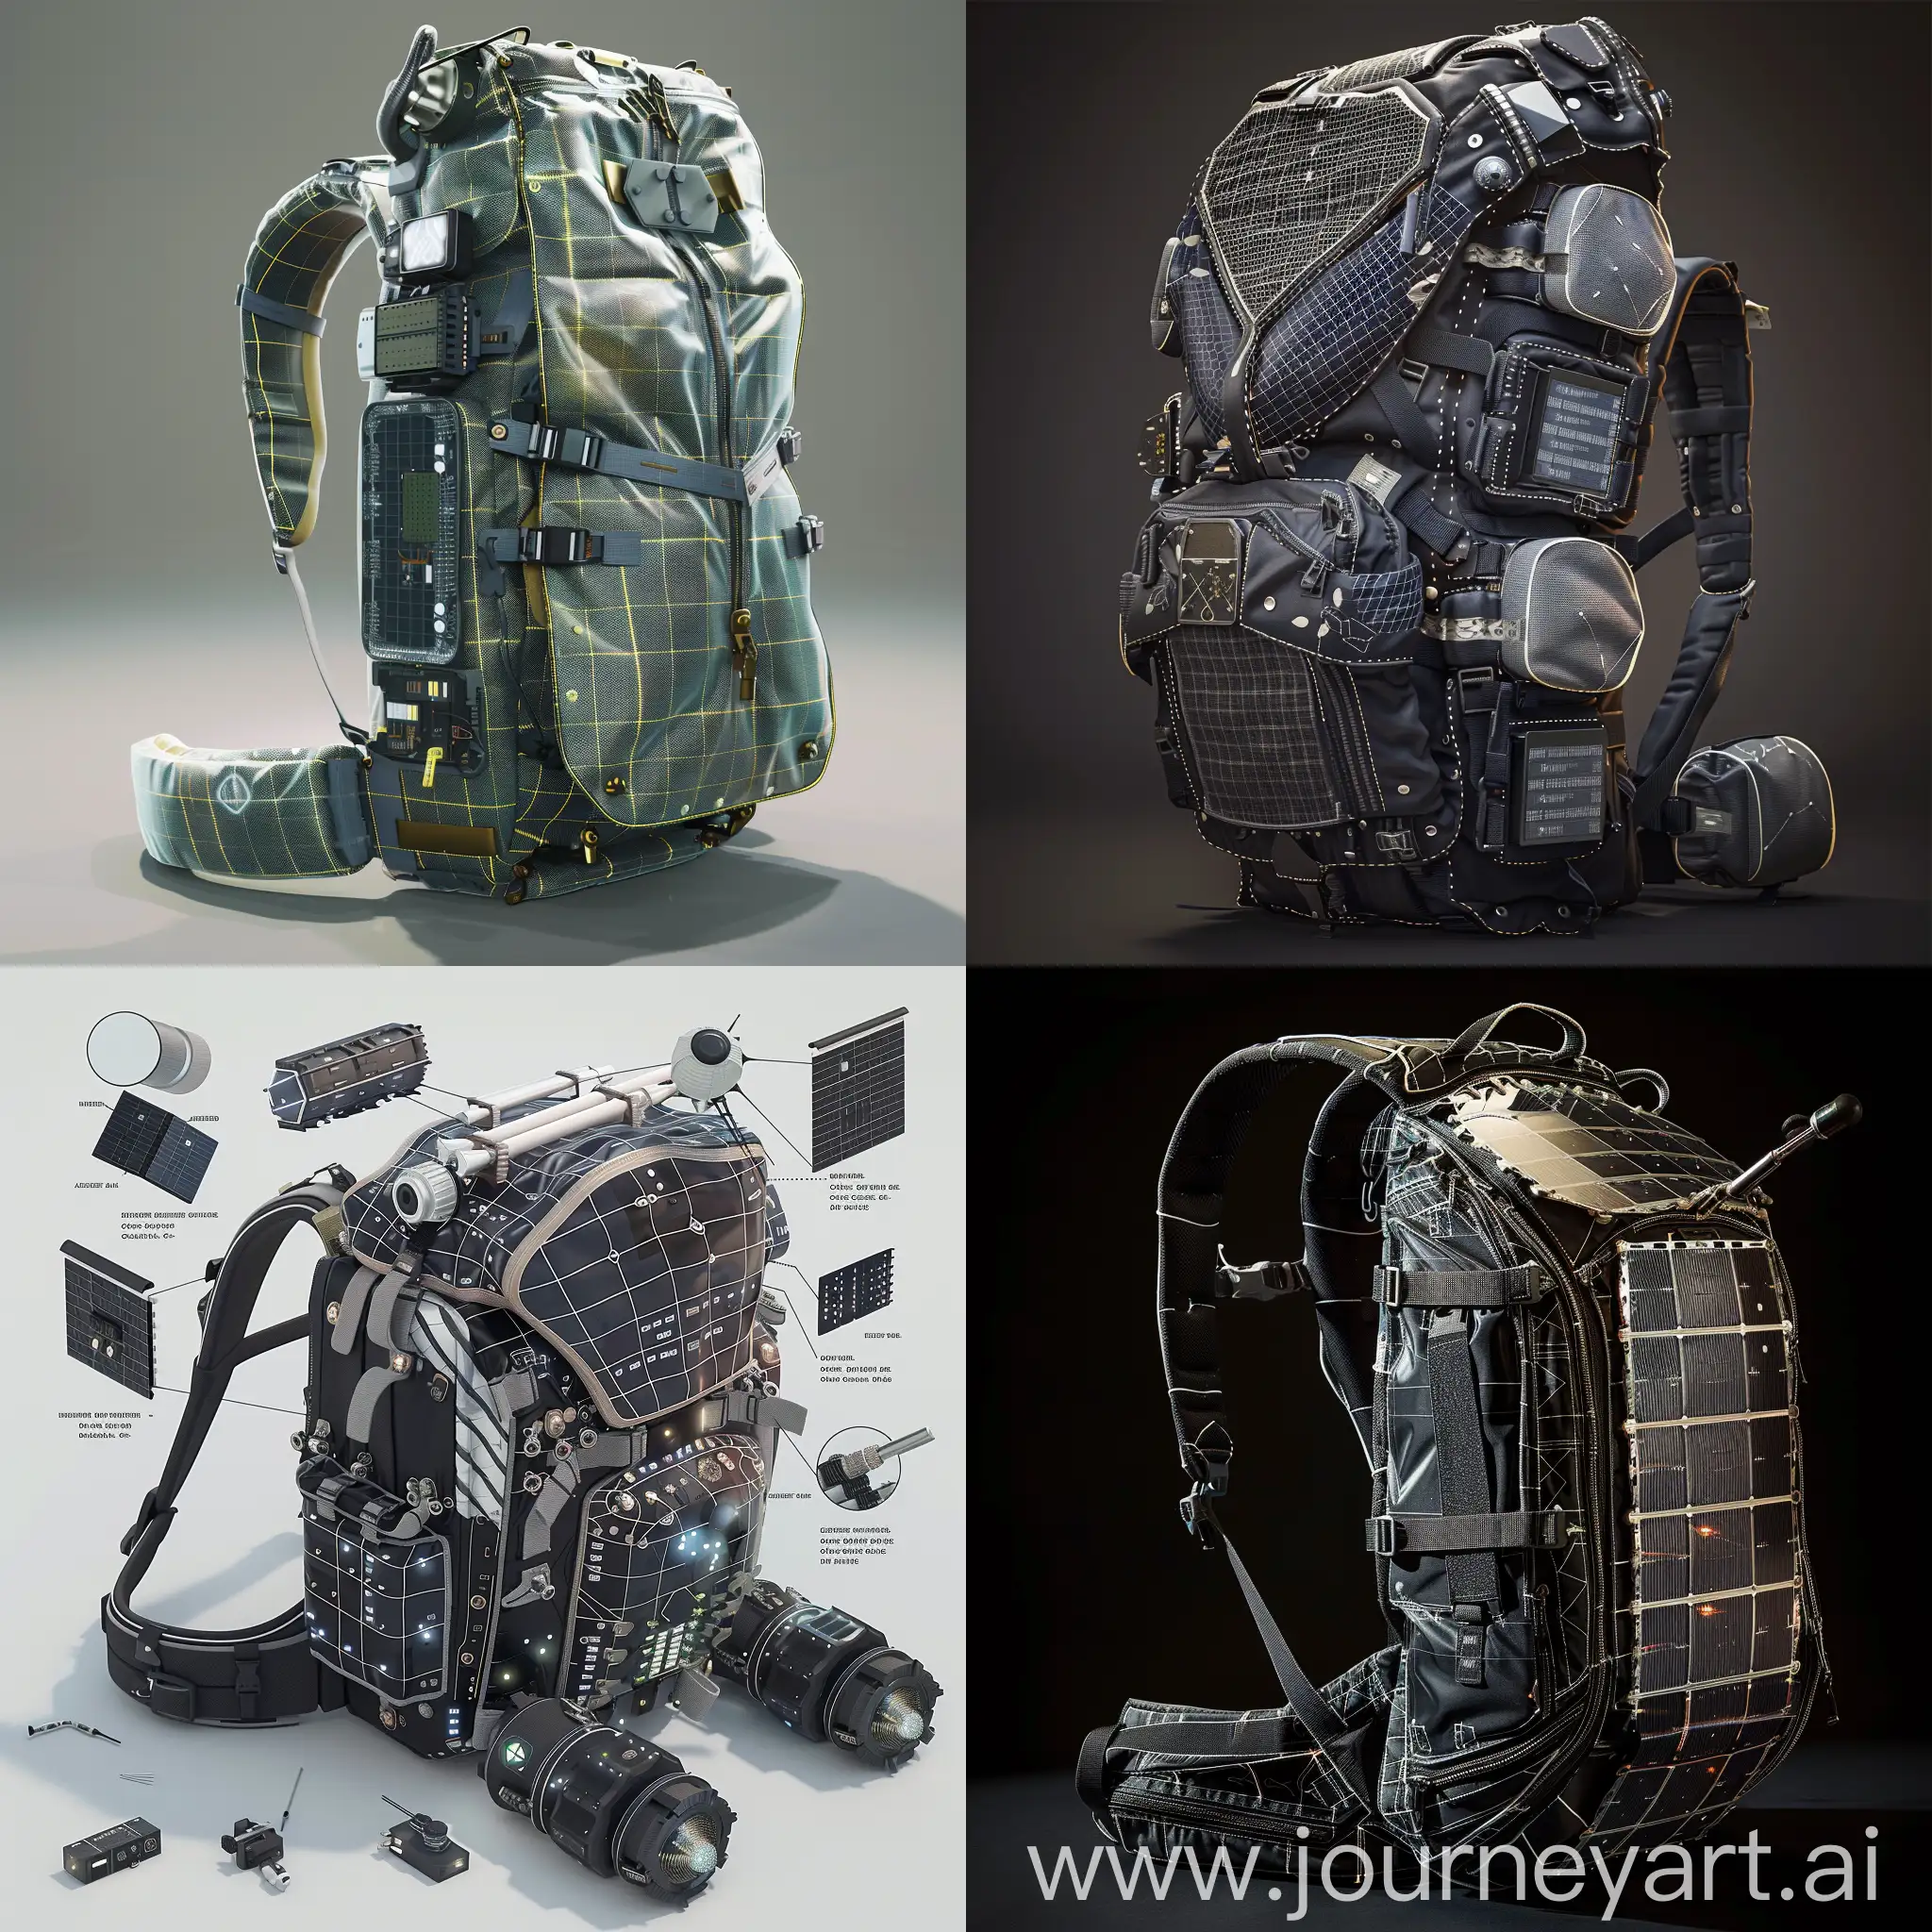 Futuristic backpack, Advanced Mirror Technology, Adaptive Optics, Multi-Spectral Imaging, Quantum Sensors, AI-Assisted Data Processing, Cryogenic Cooling Systems, Laser Communication Systems, Active Vibration Damping, Space Debris Shielding, Self-Healing Materials, Solar Sail, Deployable Sunshield, Self-Cleaning Coating, Modular Design, Radiation Shielding, Micrometeoroid Protection, Deployable Antenna Array, Artificial Gravity System, Integrated Solar Panels, Autonomous Navigation System, Customized Image Sensor Arrays, Radiation-Hardened Processors, High-Speed Analog-to-Digital Converters (ADCs), Field-Programmable Gate Arrays (FPGAs), Low-Power Signal Processing Units, Digital Signal Processors (DSPs), Integrated Memory Modules, System-on-Chip (SoC) Integration, Secure Data Encryption Modules, Thermal Management Systems, Radiation-Hardened Enclosures, High-Durability Semiconductor Coatings, Integrated Power Management ICs, Wireless Communication Modules, Temperature-Resistant Semiconductor Materials, EMI Shielding Semiconductor Films, Lightweight Semiconductor Heatsinks, Flexible Semiconductor Circuit Boards, Optically Transparent Semiconductor Windows, Self-Healing Semiconductor Materials, in cinematic style